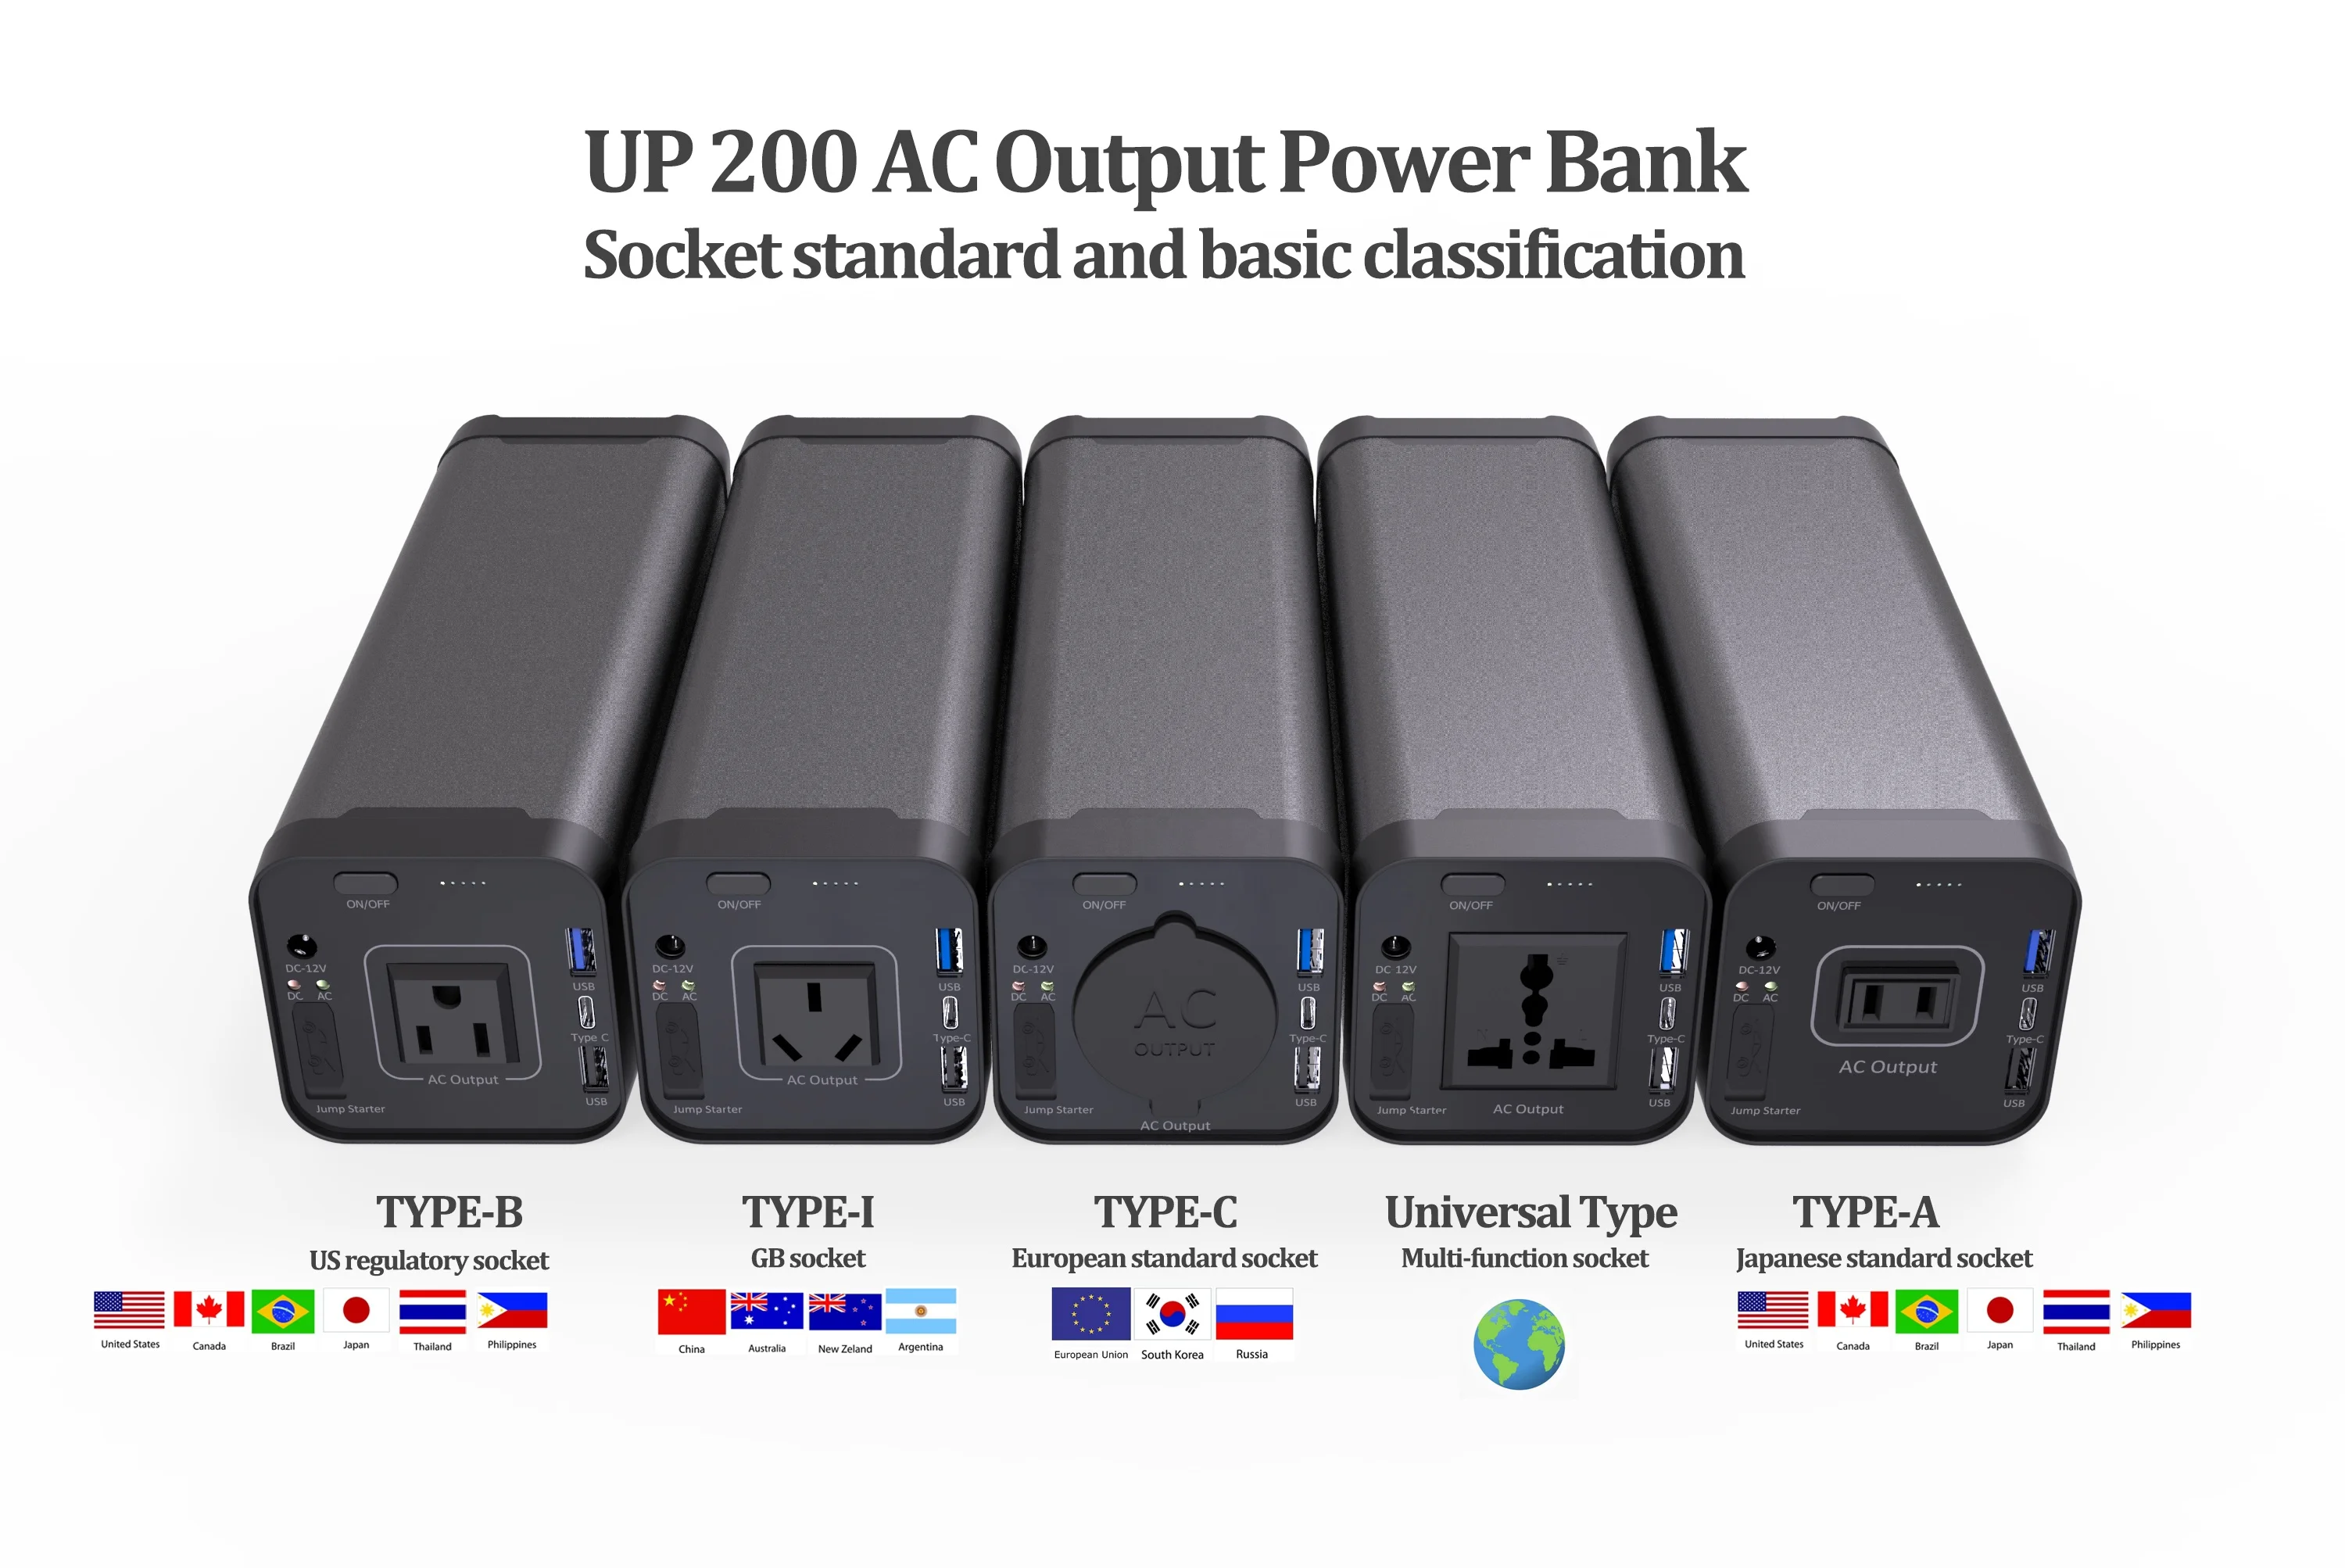 Frontier pause Syge person Wholesale 40800mah Lithium Battery Power Pack Ac Output 150w Home Power Bank  With 5v 2.4a Usb Ports - Buy Ac Power Bank,Portable Power Station,Laptop  Power Station Product on Alibaba.com